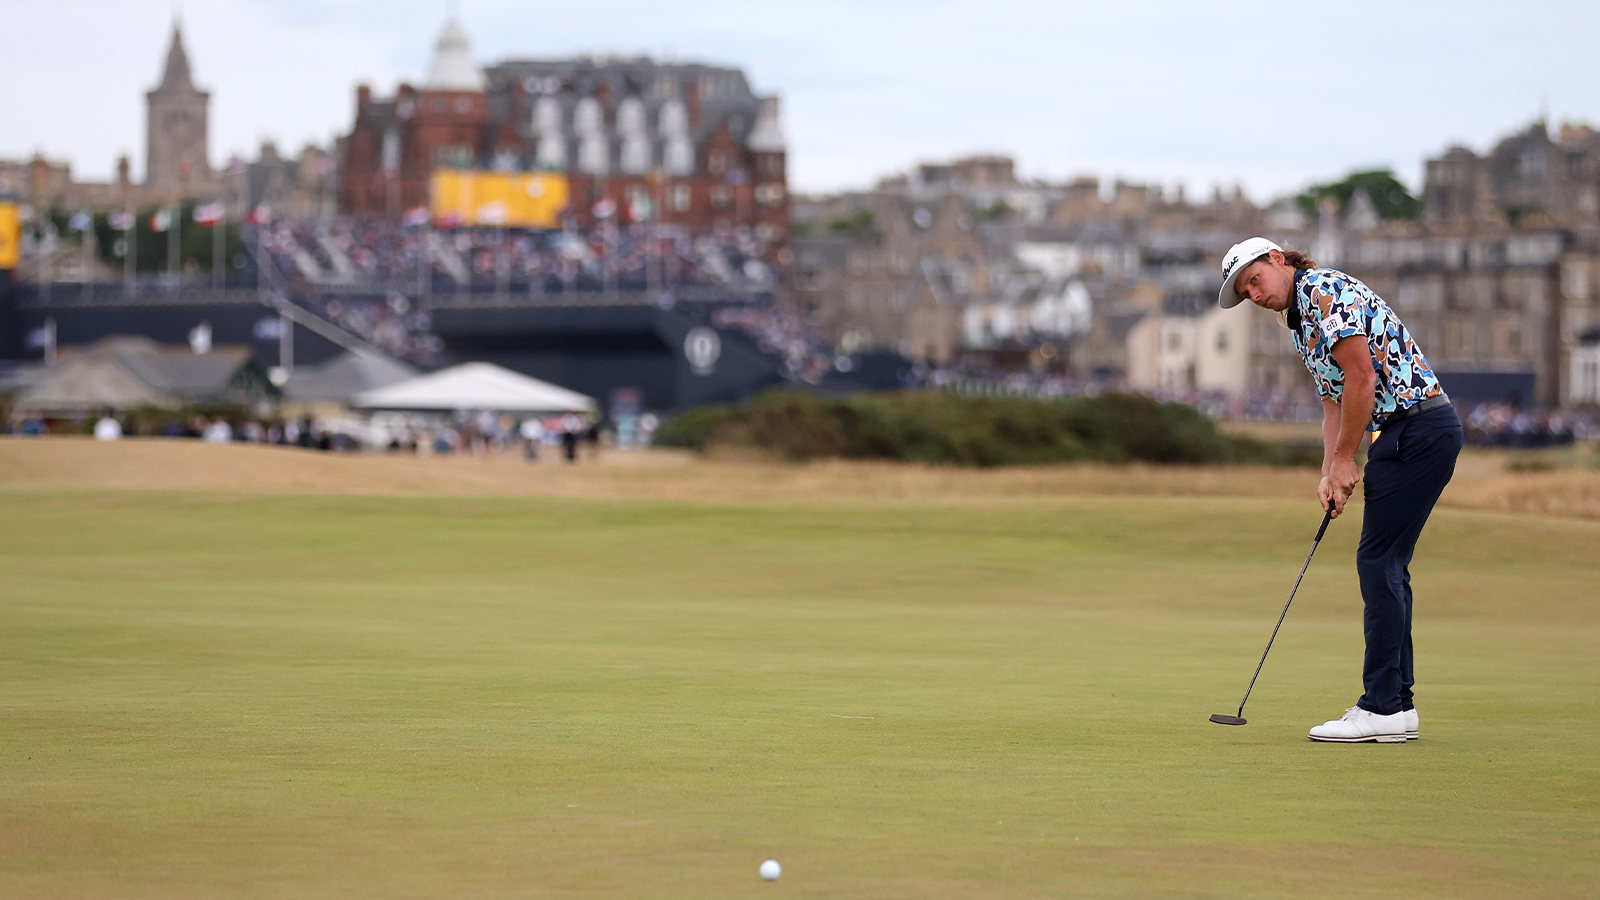 Cameron Smith of Australia putts on the 16th green during Day Three of The 150th Open at St Andrews Old Course on July 16, 2022 in St Andrews, Scotland. (Photo by Warren Little/Getty Images)